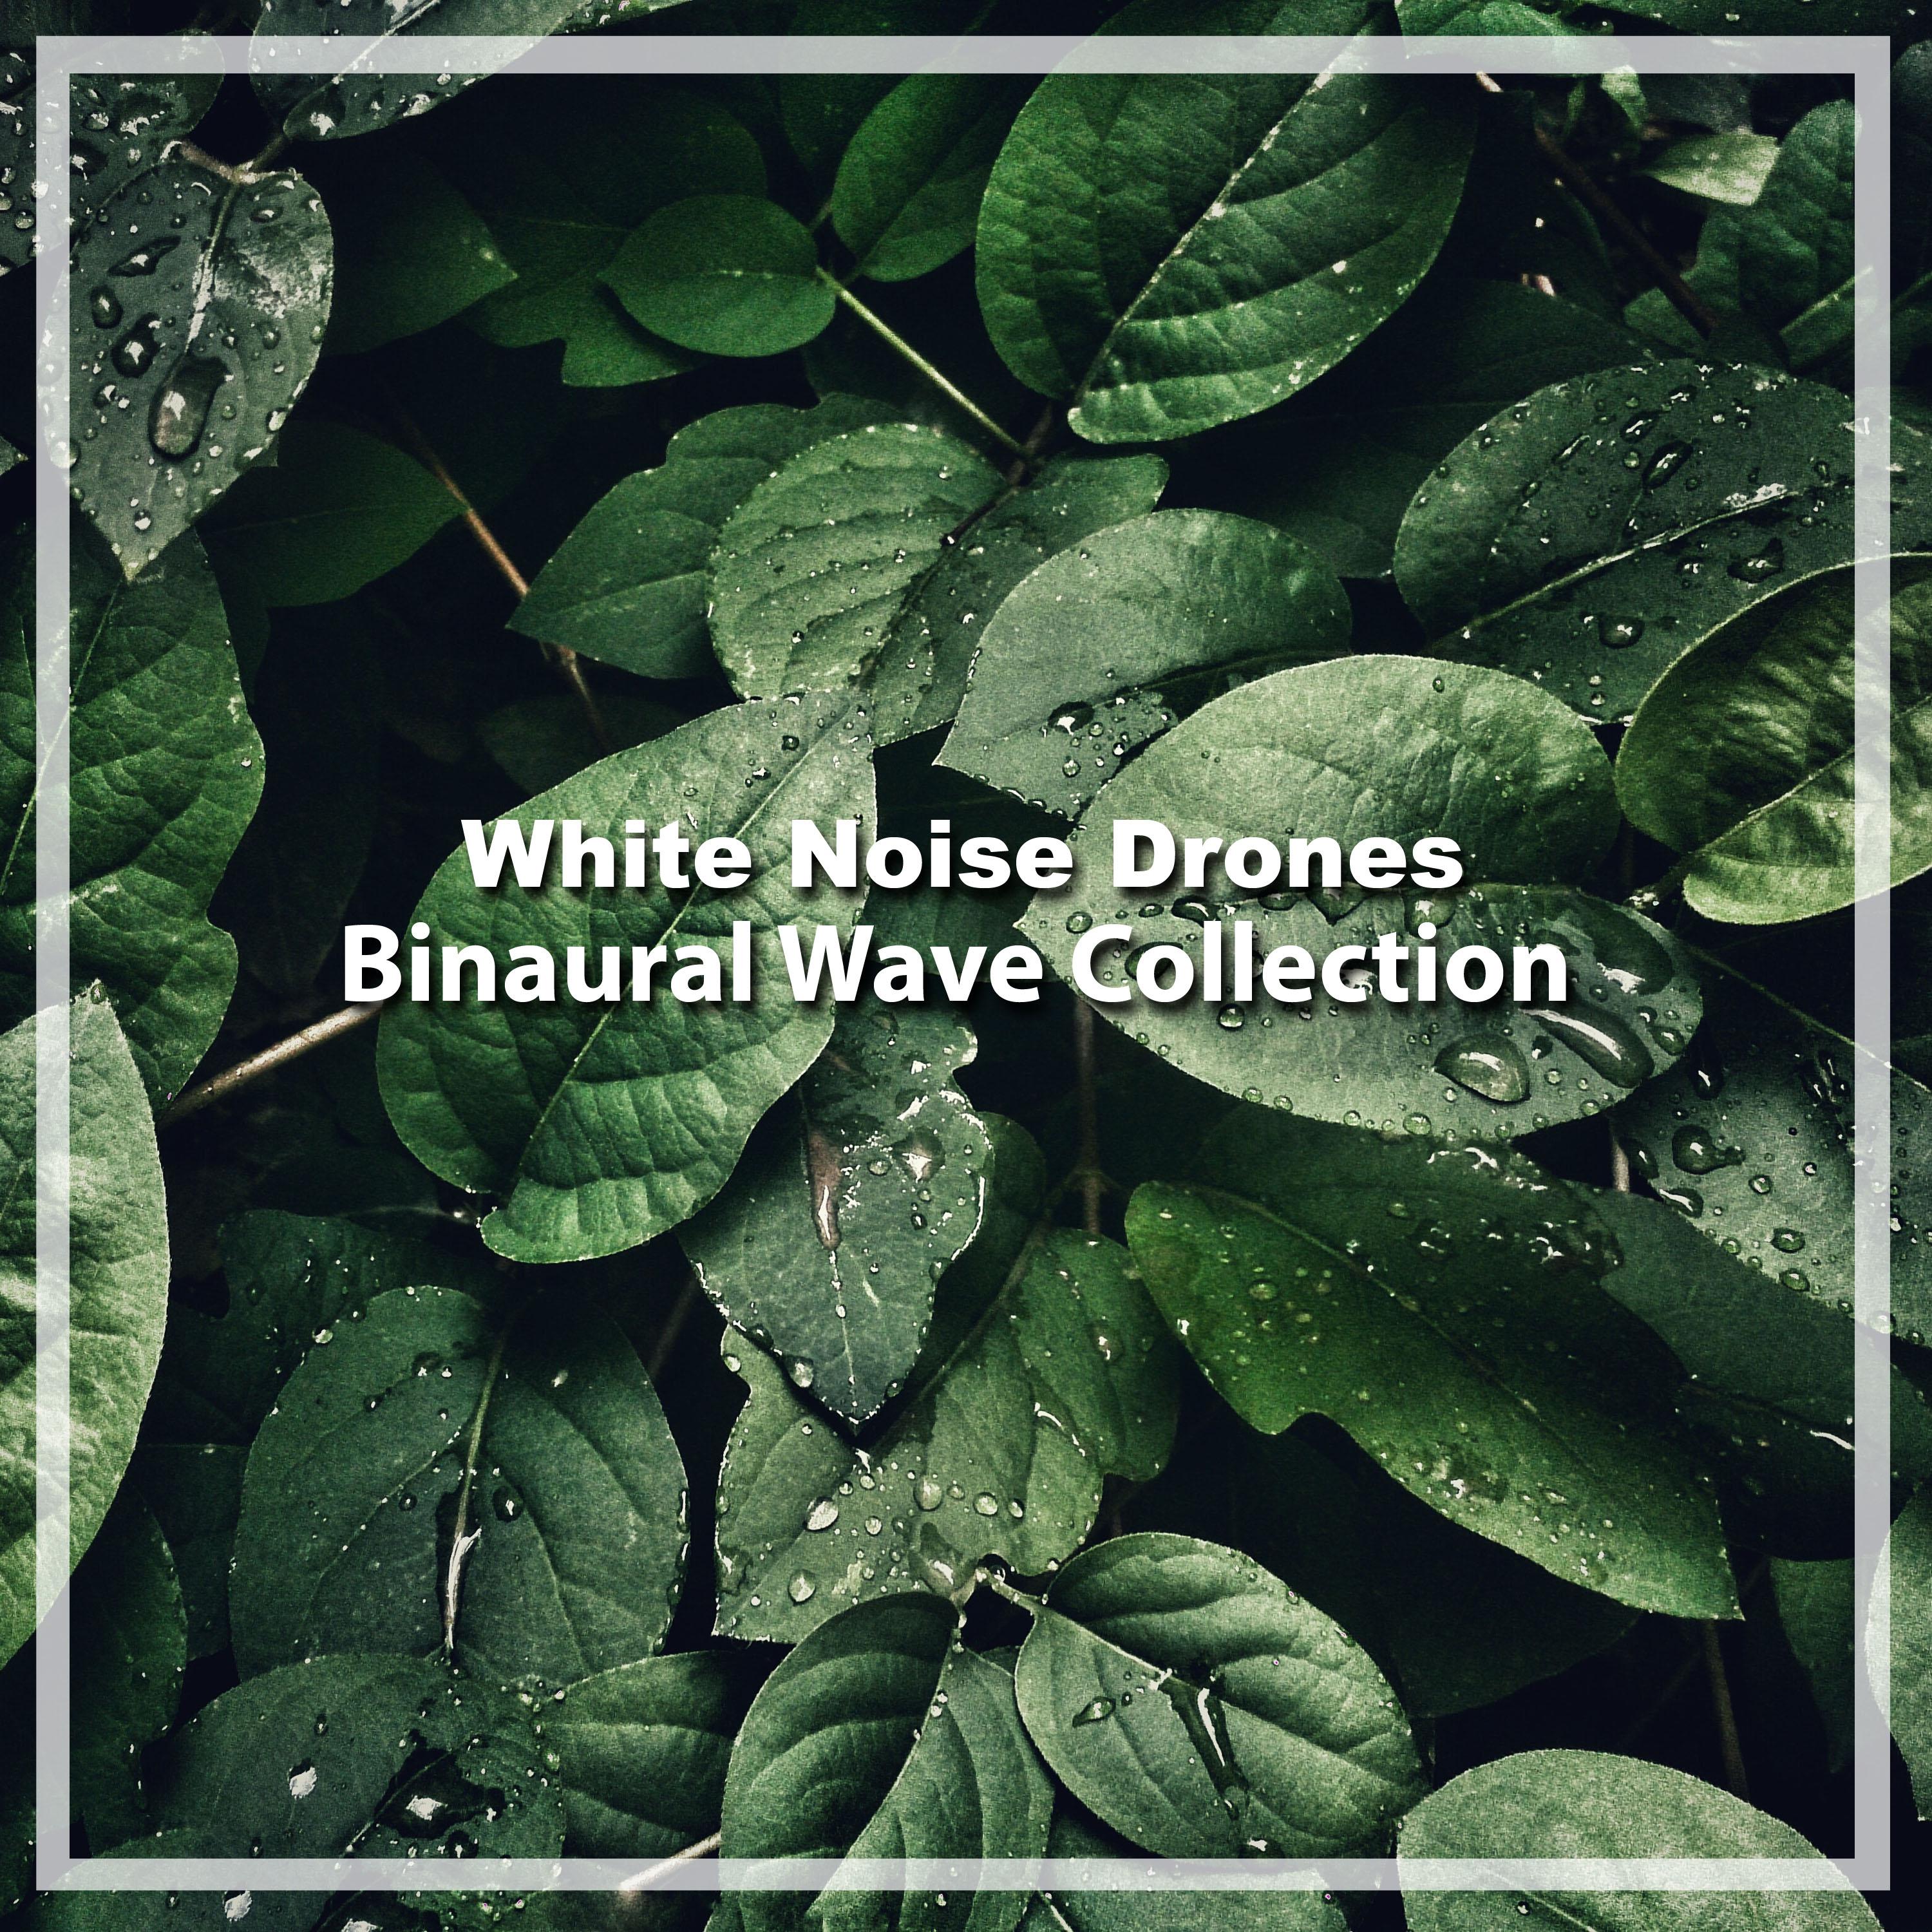 12 Drones of White Noise: Binaural Wave Collection